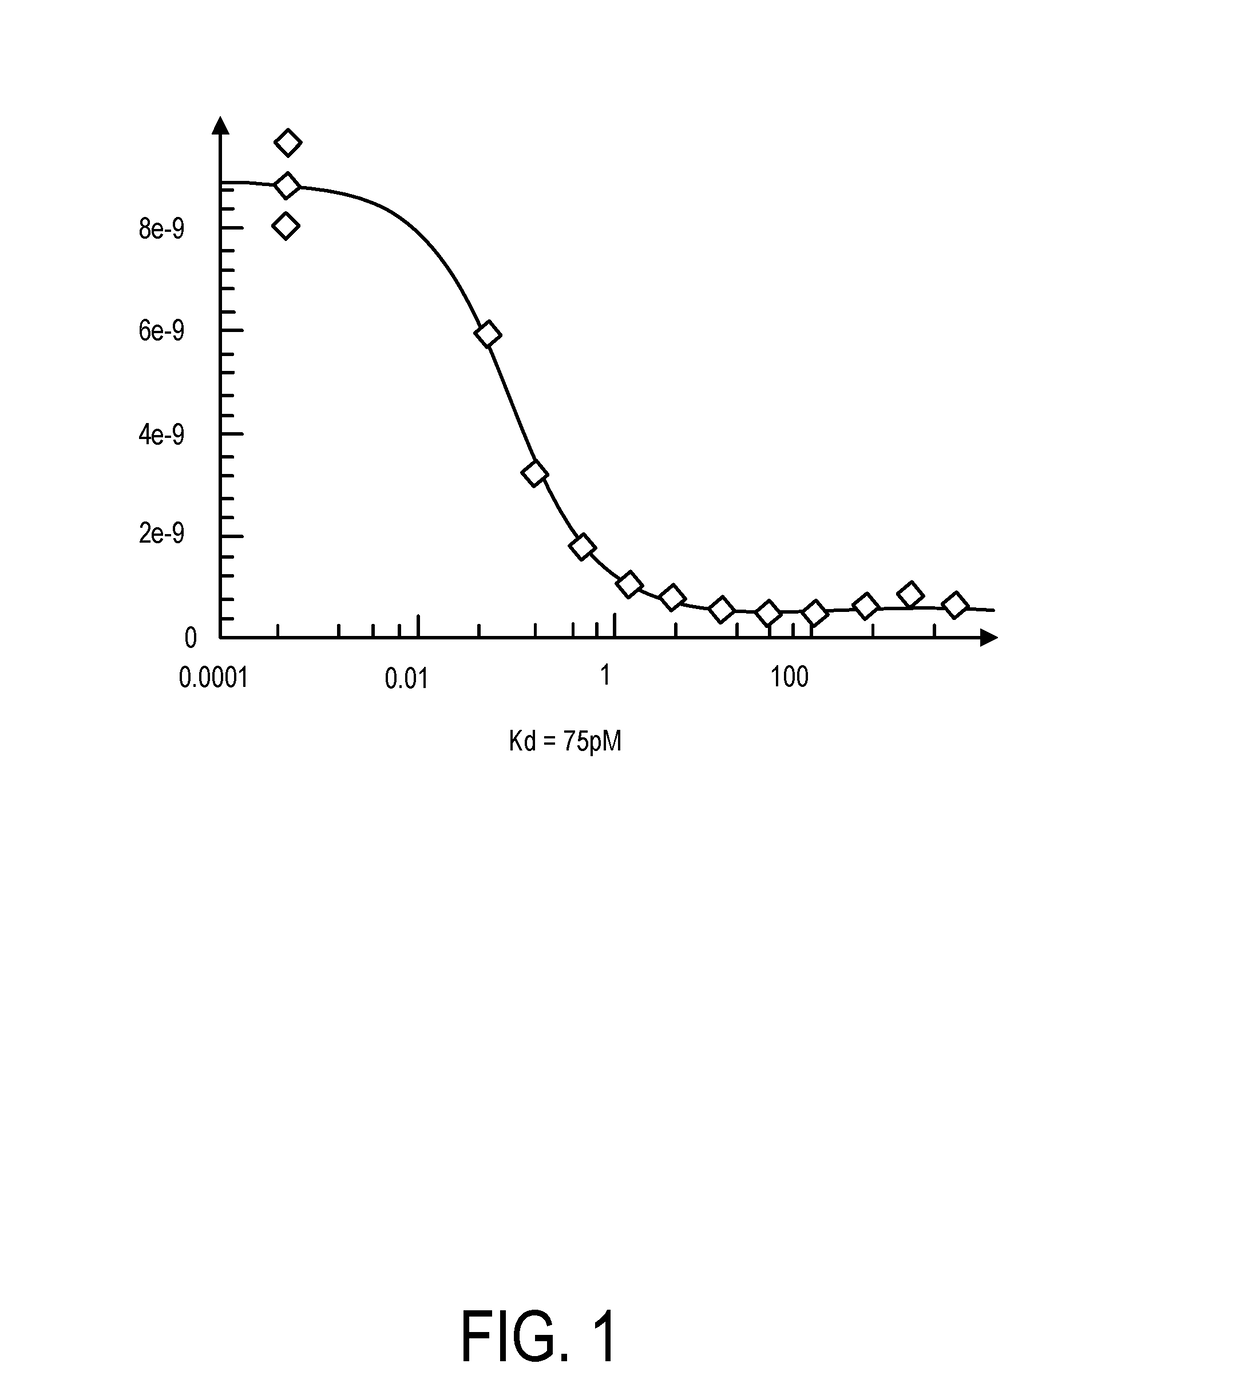 Anti-viral compositions containing pikfyve inhibitors and use thereof